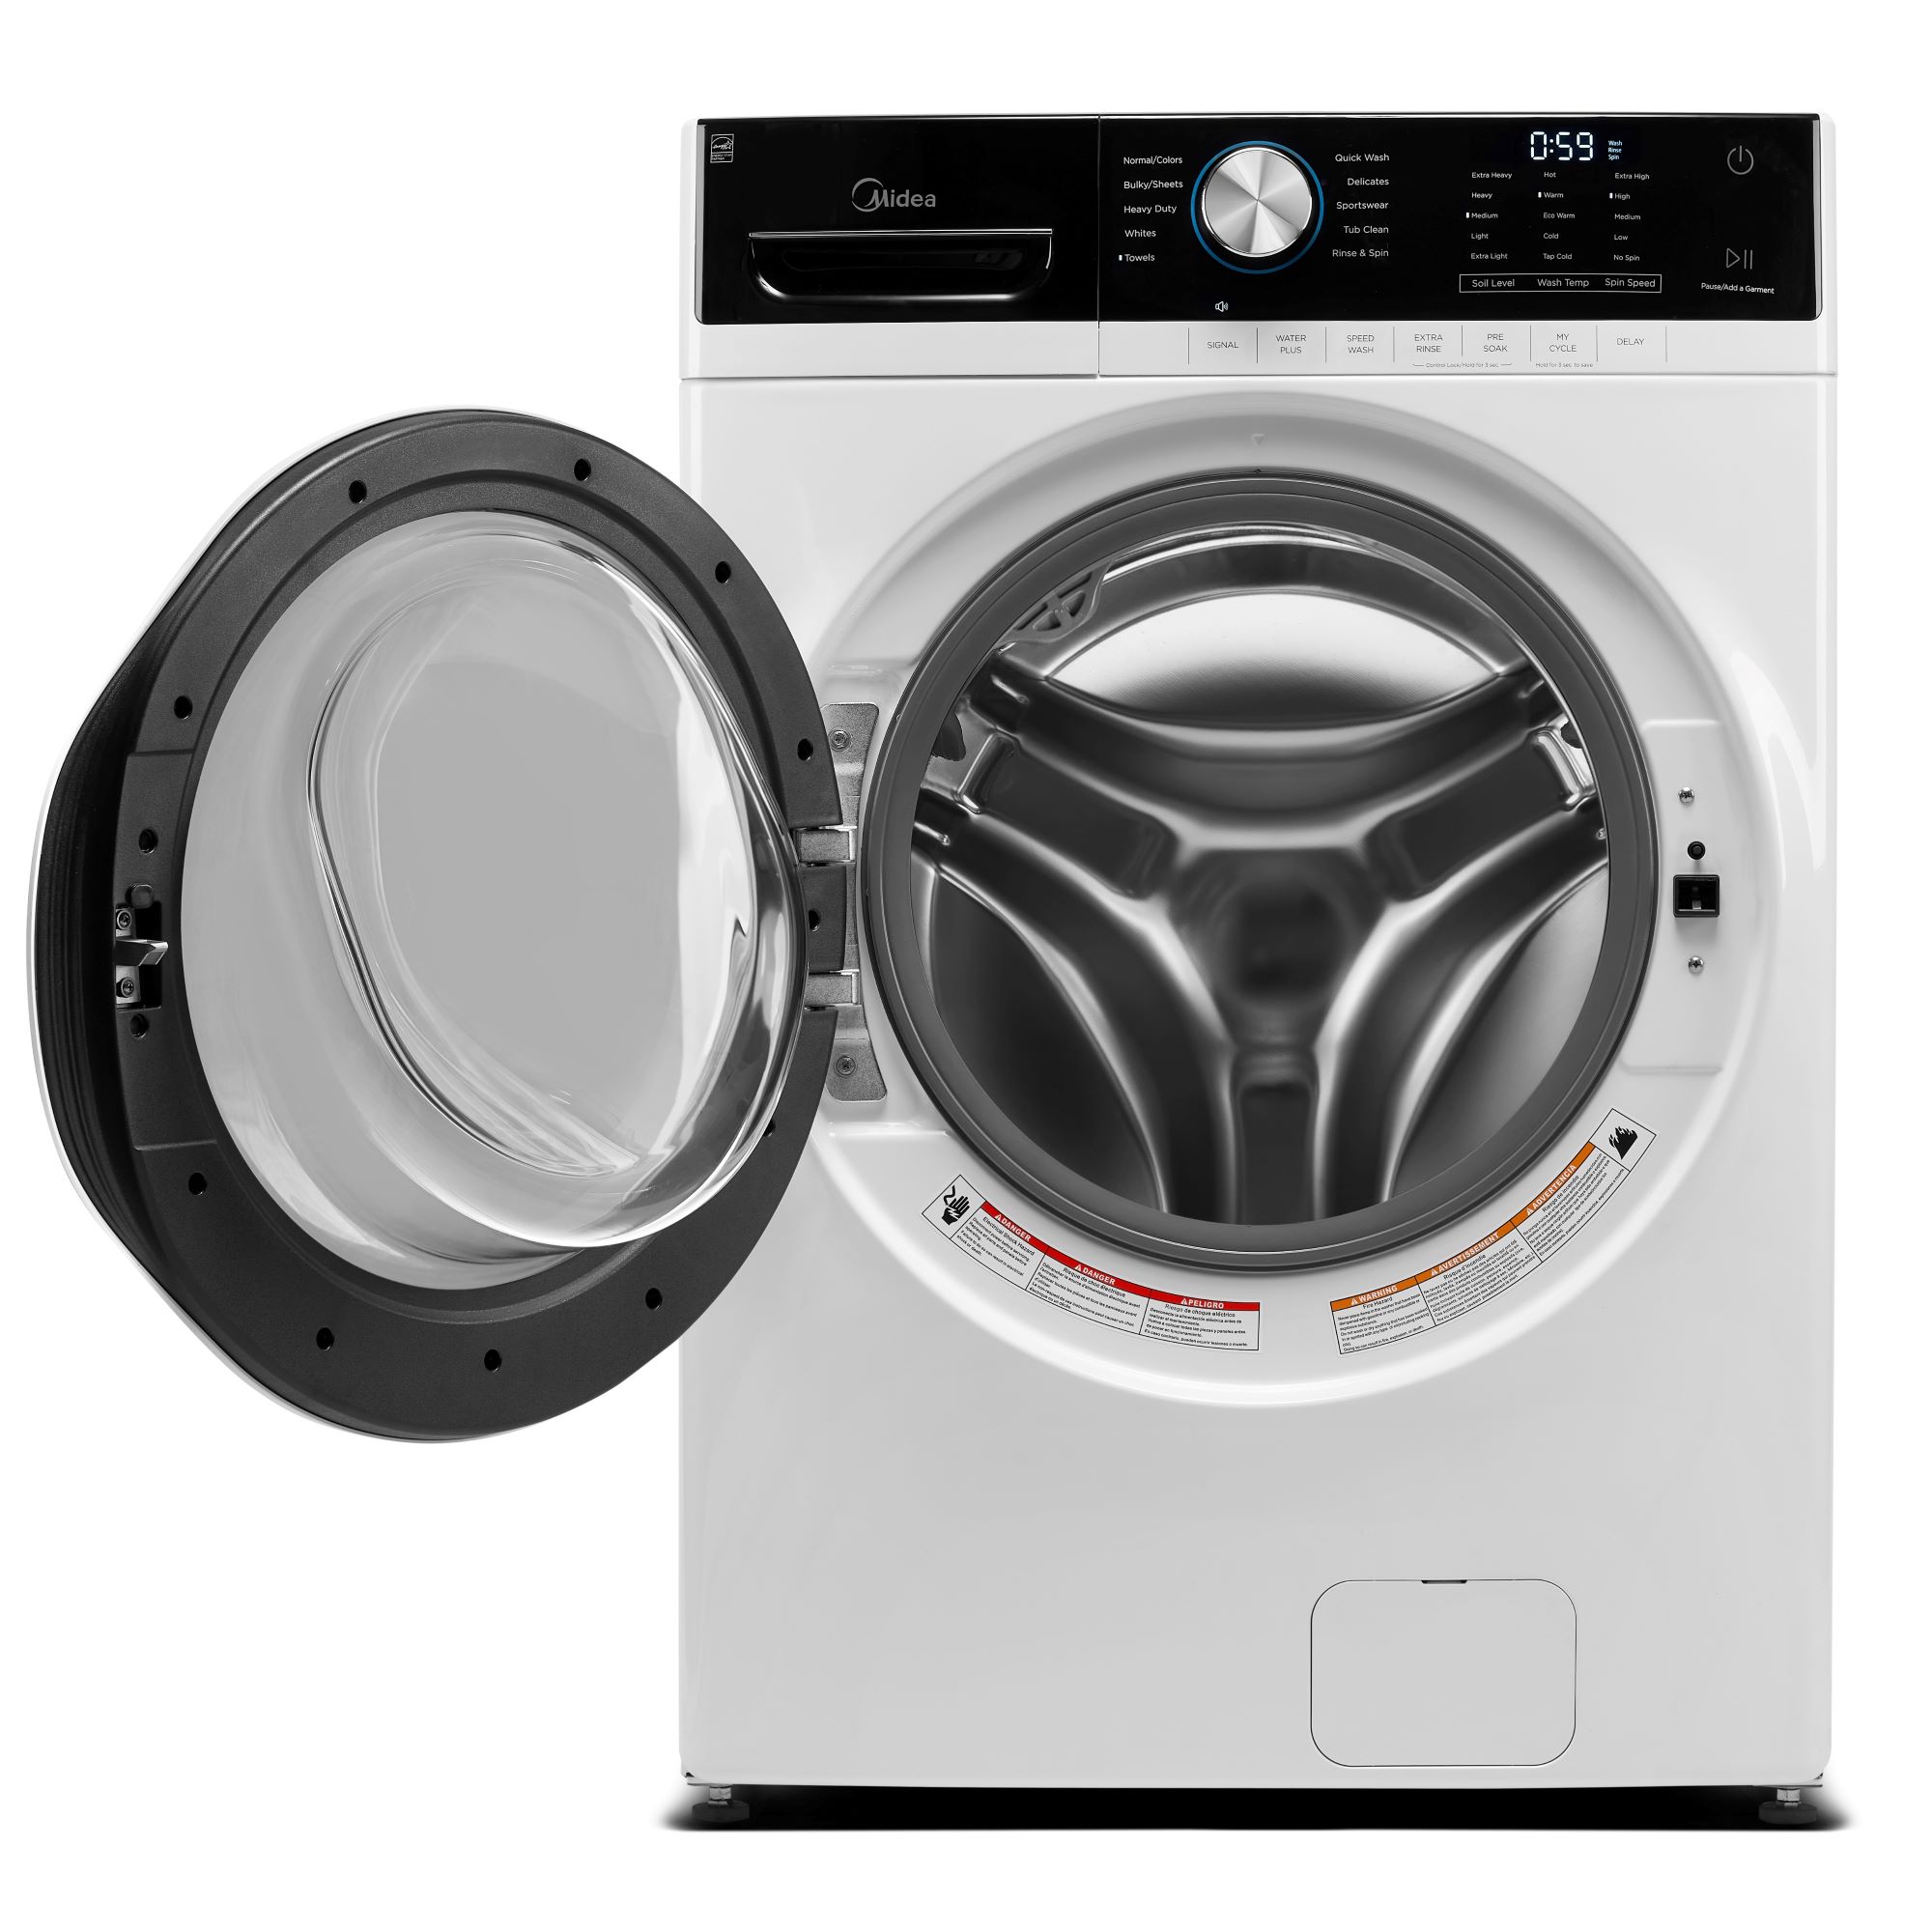 Buy Midea 7 kg Fully Automatic Front Load Washing Machine with Heater online